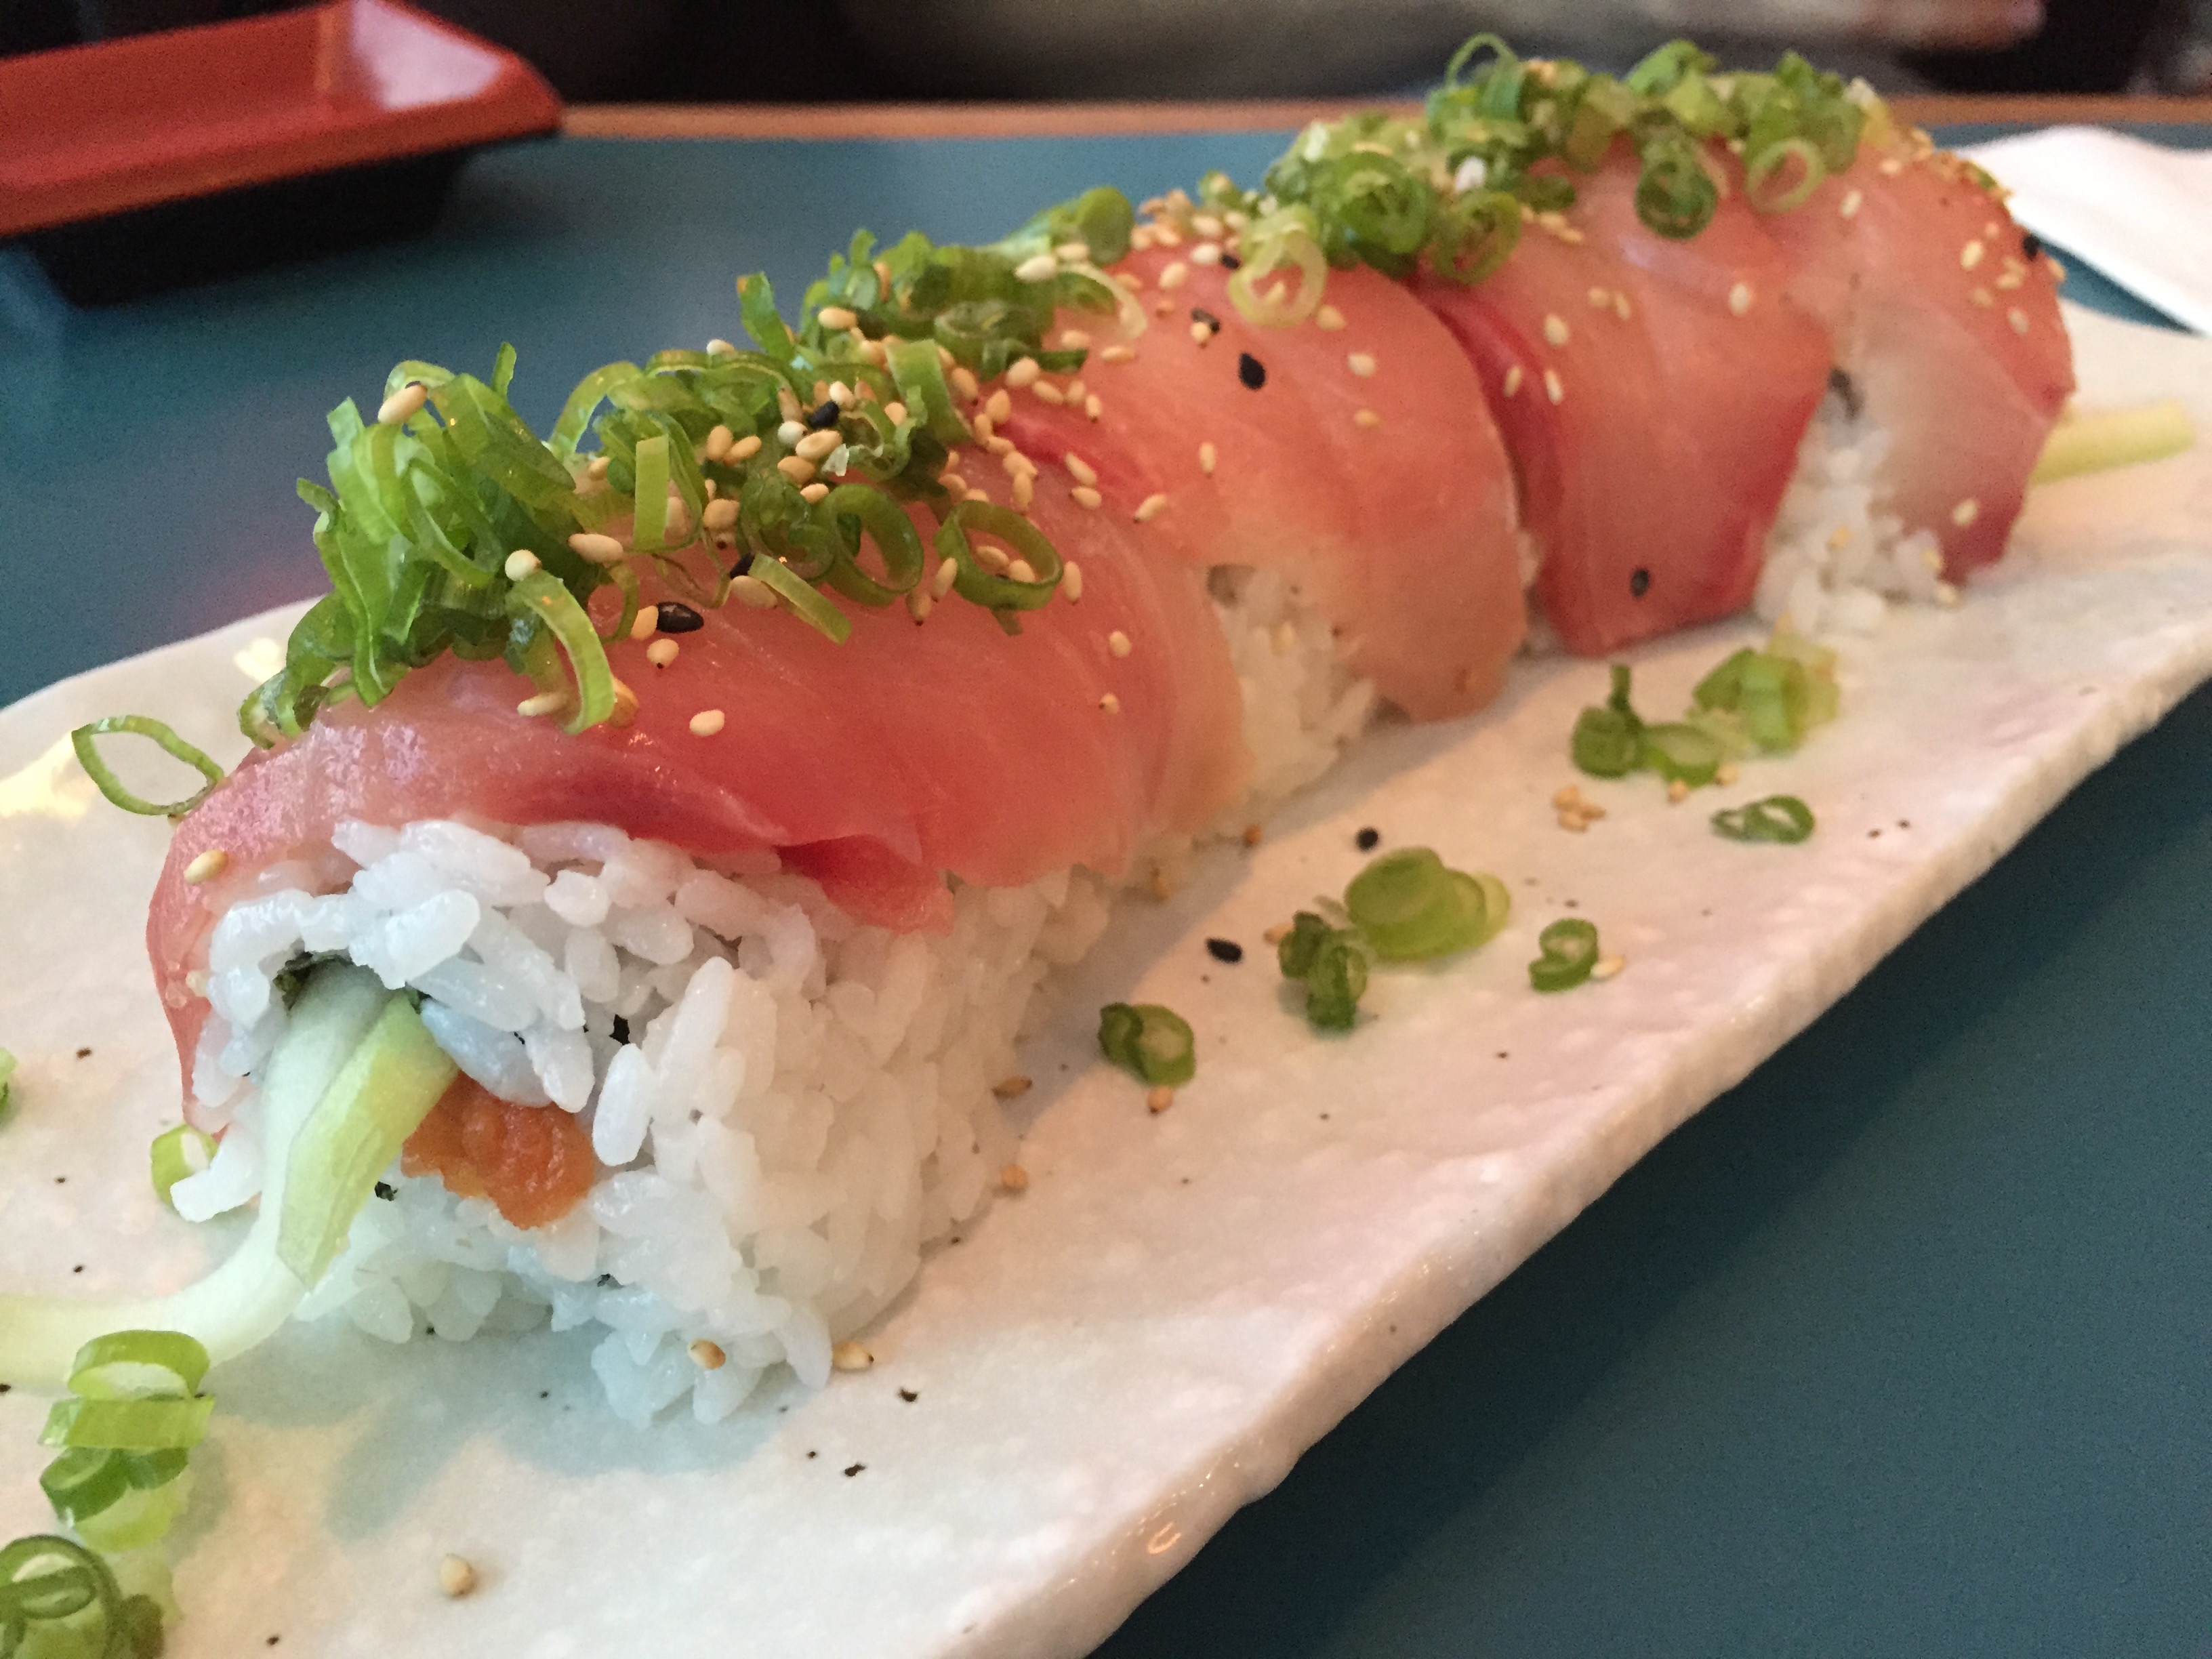 Stick with the sushi | San Diego Reader